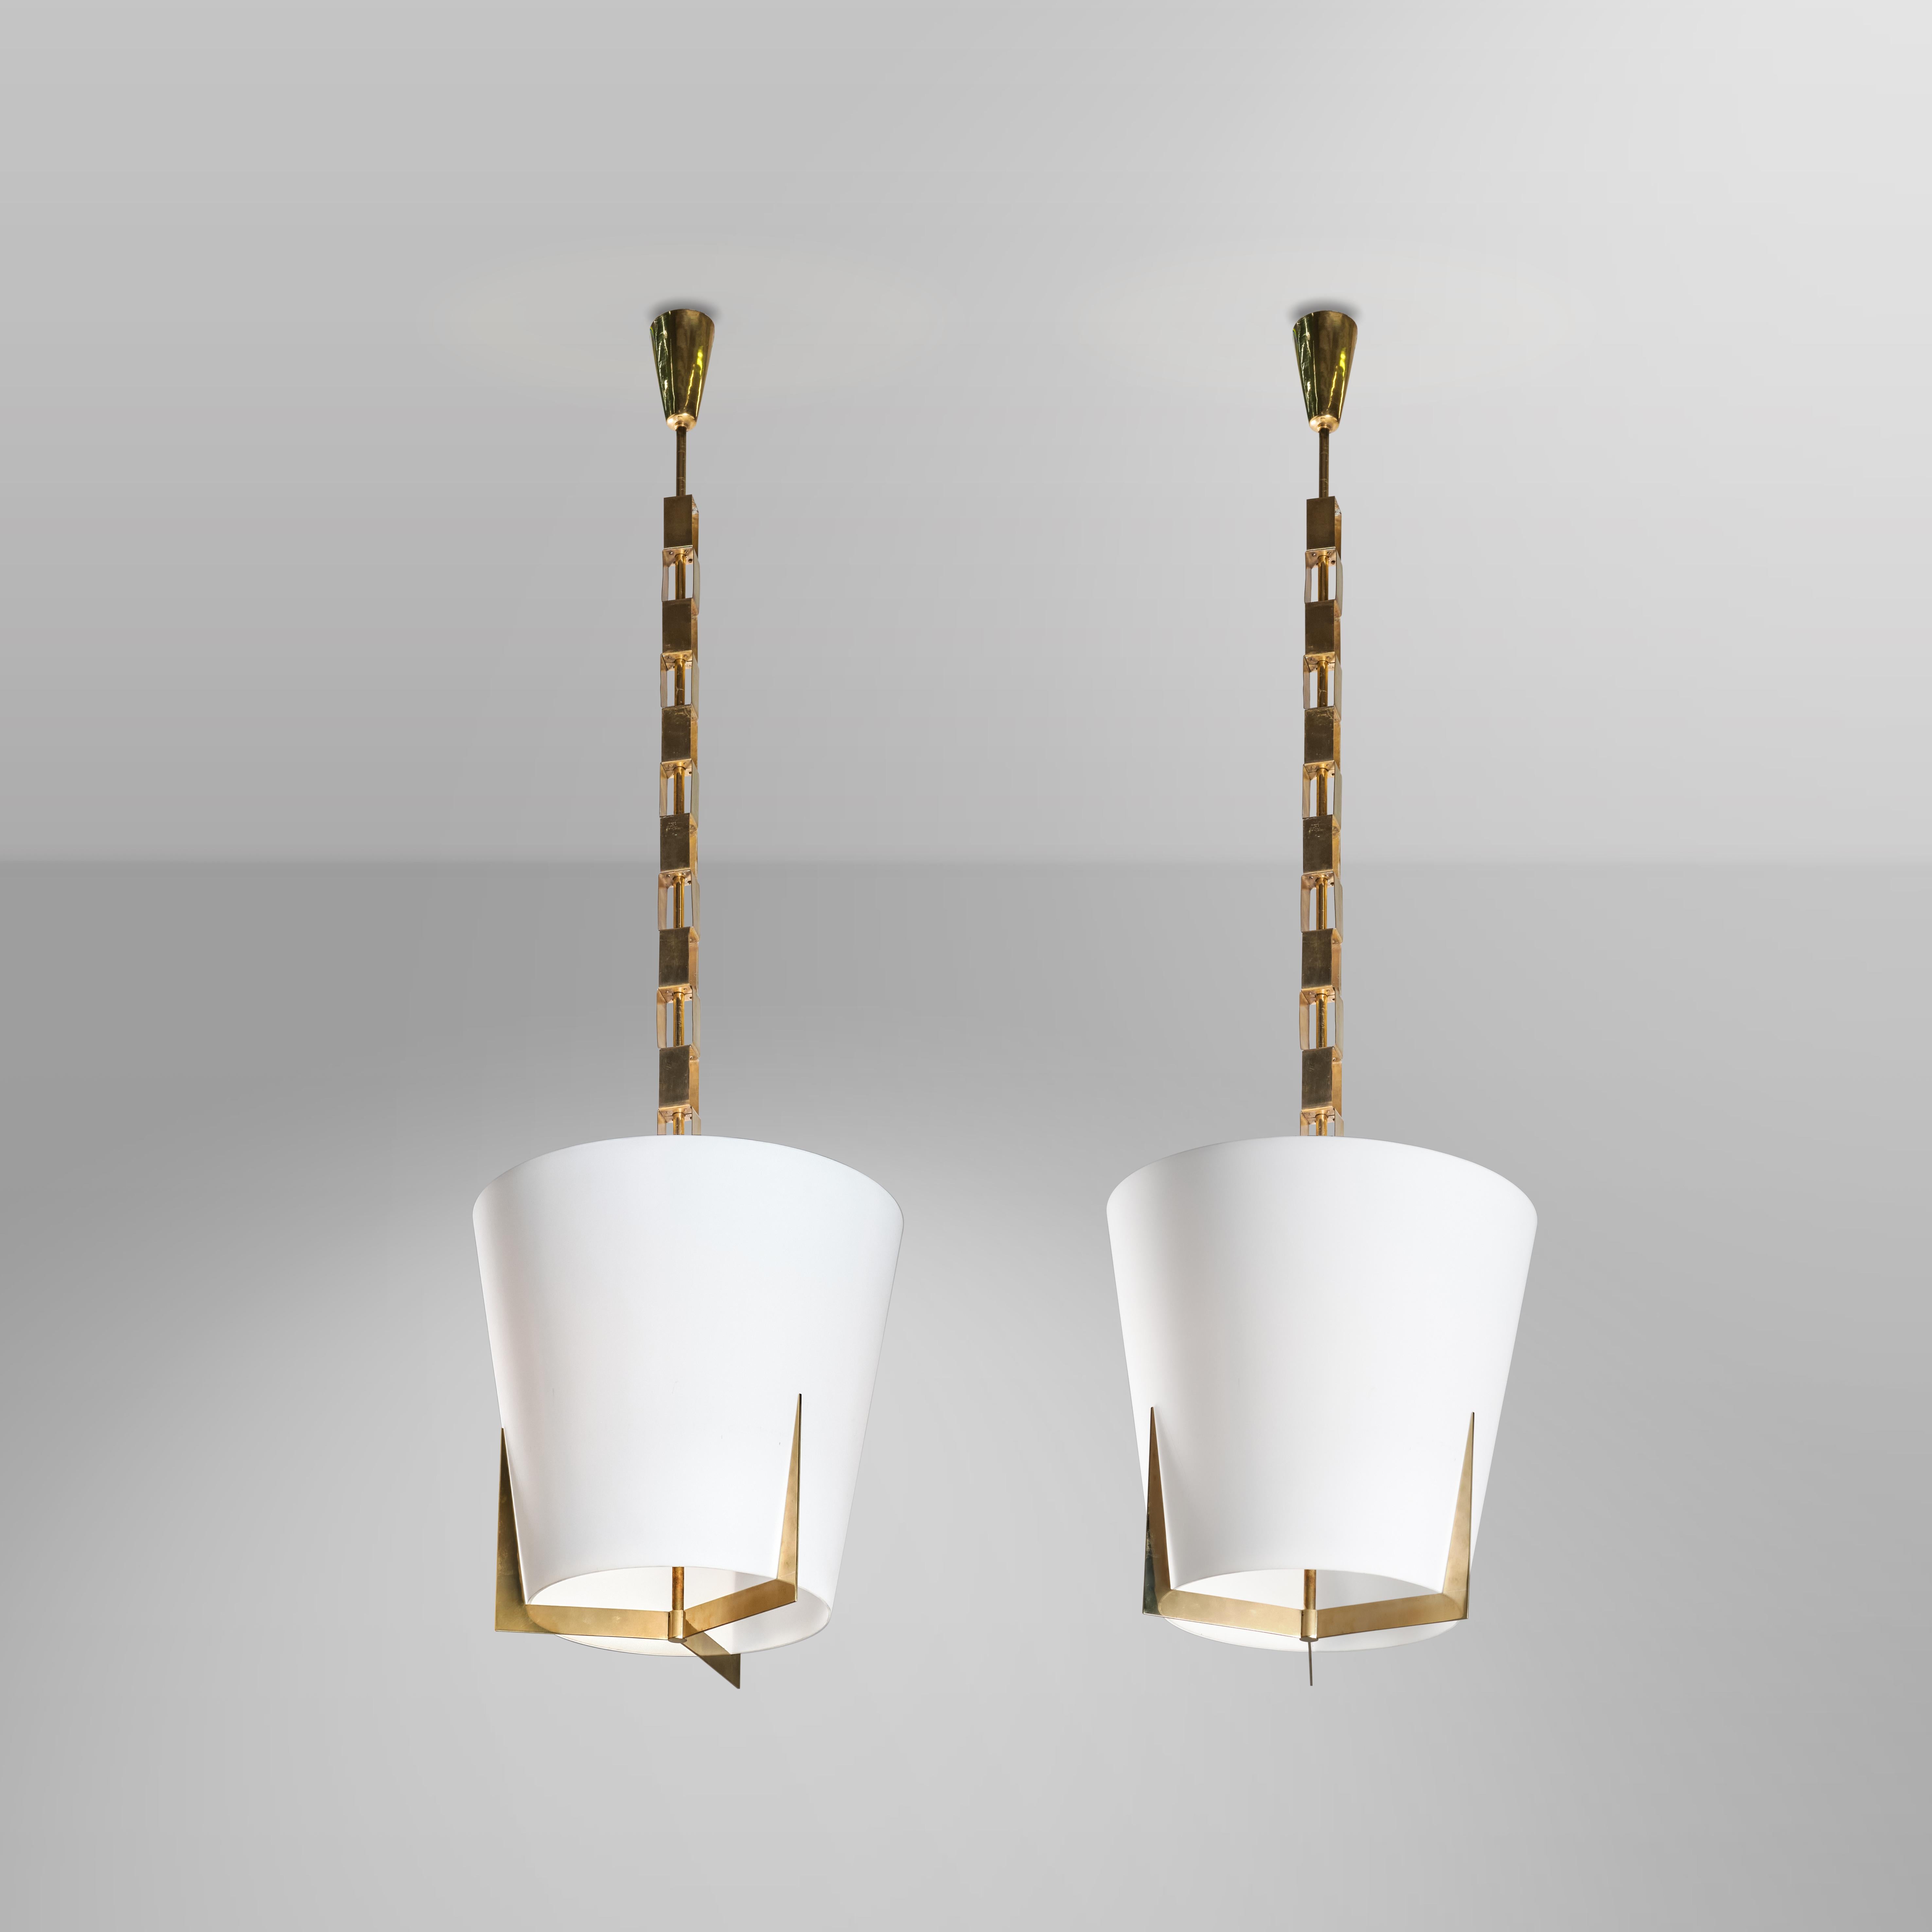 Two fantastic hanging lamps with brass structure and opal glass diffuser, typical of Fontana Arte's production and models of the 1960s. This pair of pendant lamps are as simple as they are decoratively appealing: they make elegance their strong